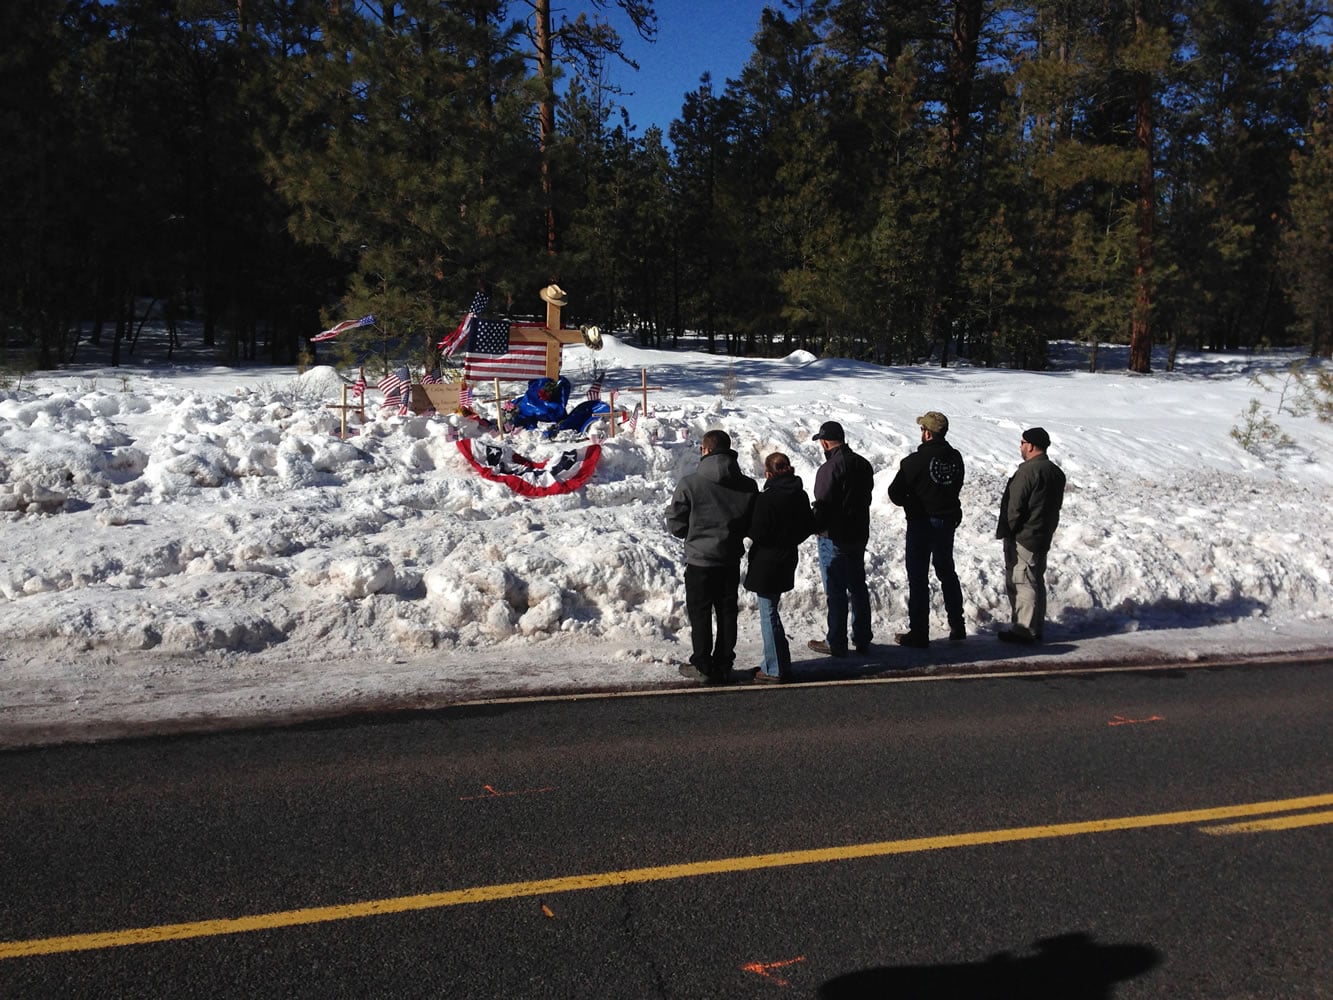 Mourners gather Sunday on U.S. Highway 395 at a roadside memorial where rancher LaVoy Finicum was shot and killed Tuesday night in a confrontation with the FBI and Oregon State Police near Burns, Ore. (Nick K.